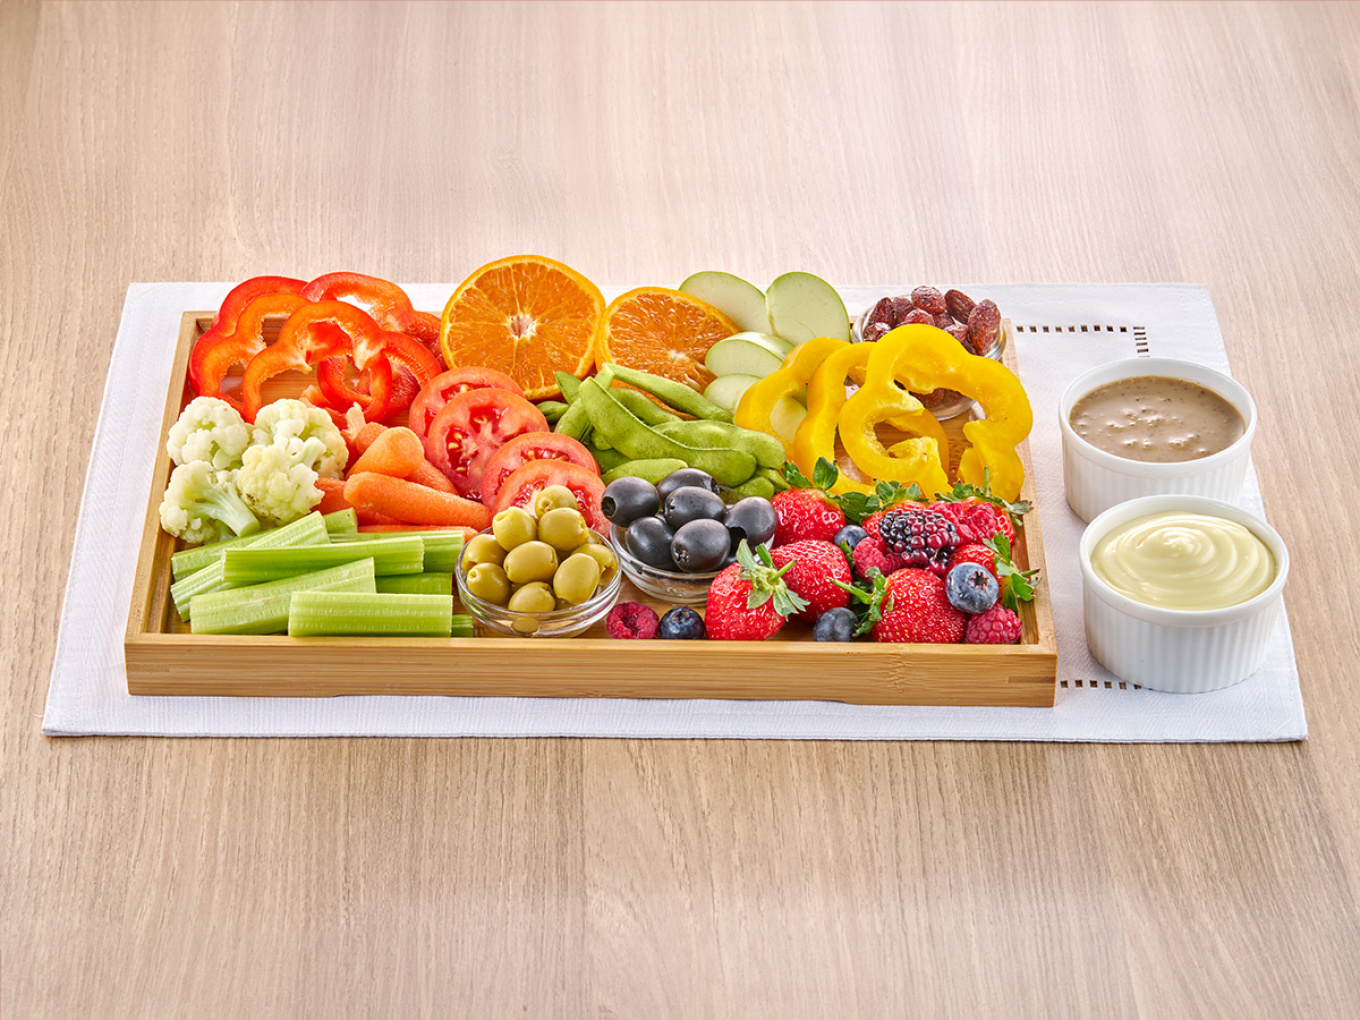 Vegetable and Fruit Tray with KEWPIE Dipping Sauce